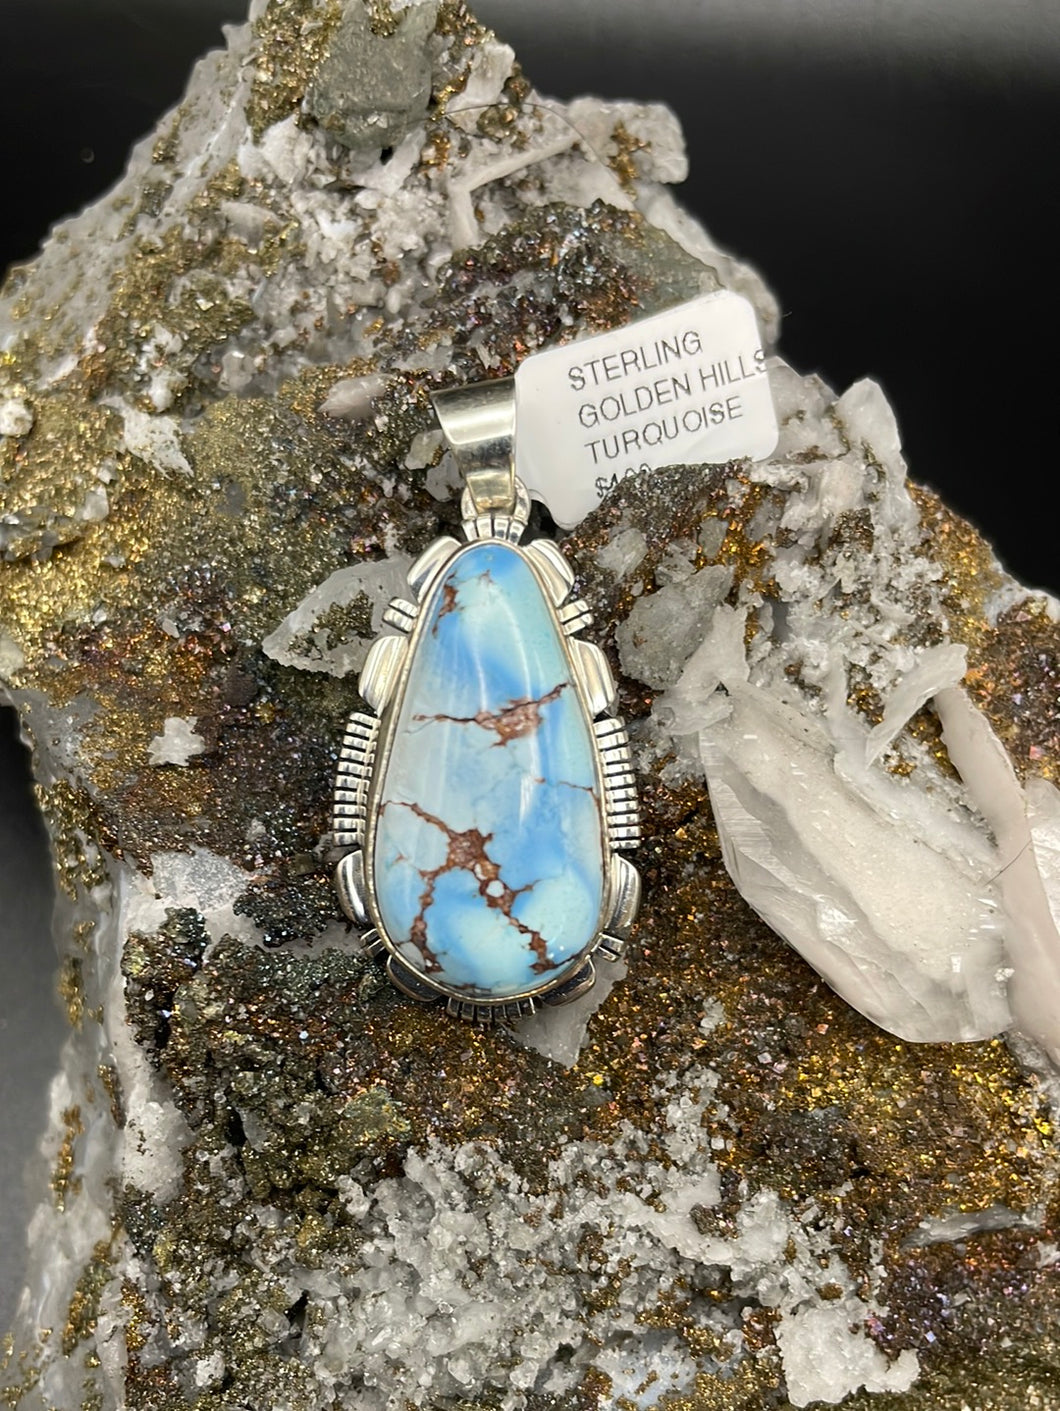 Golden Hills Turquoise and Sterling Silver Pendant